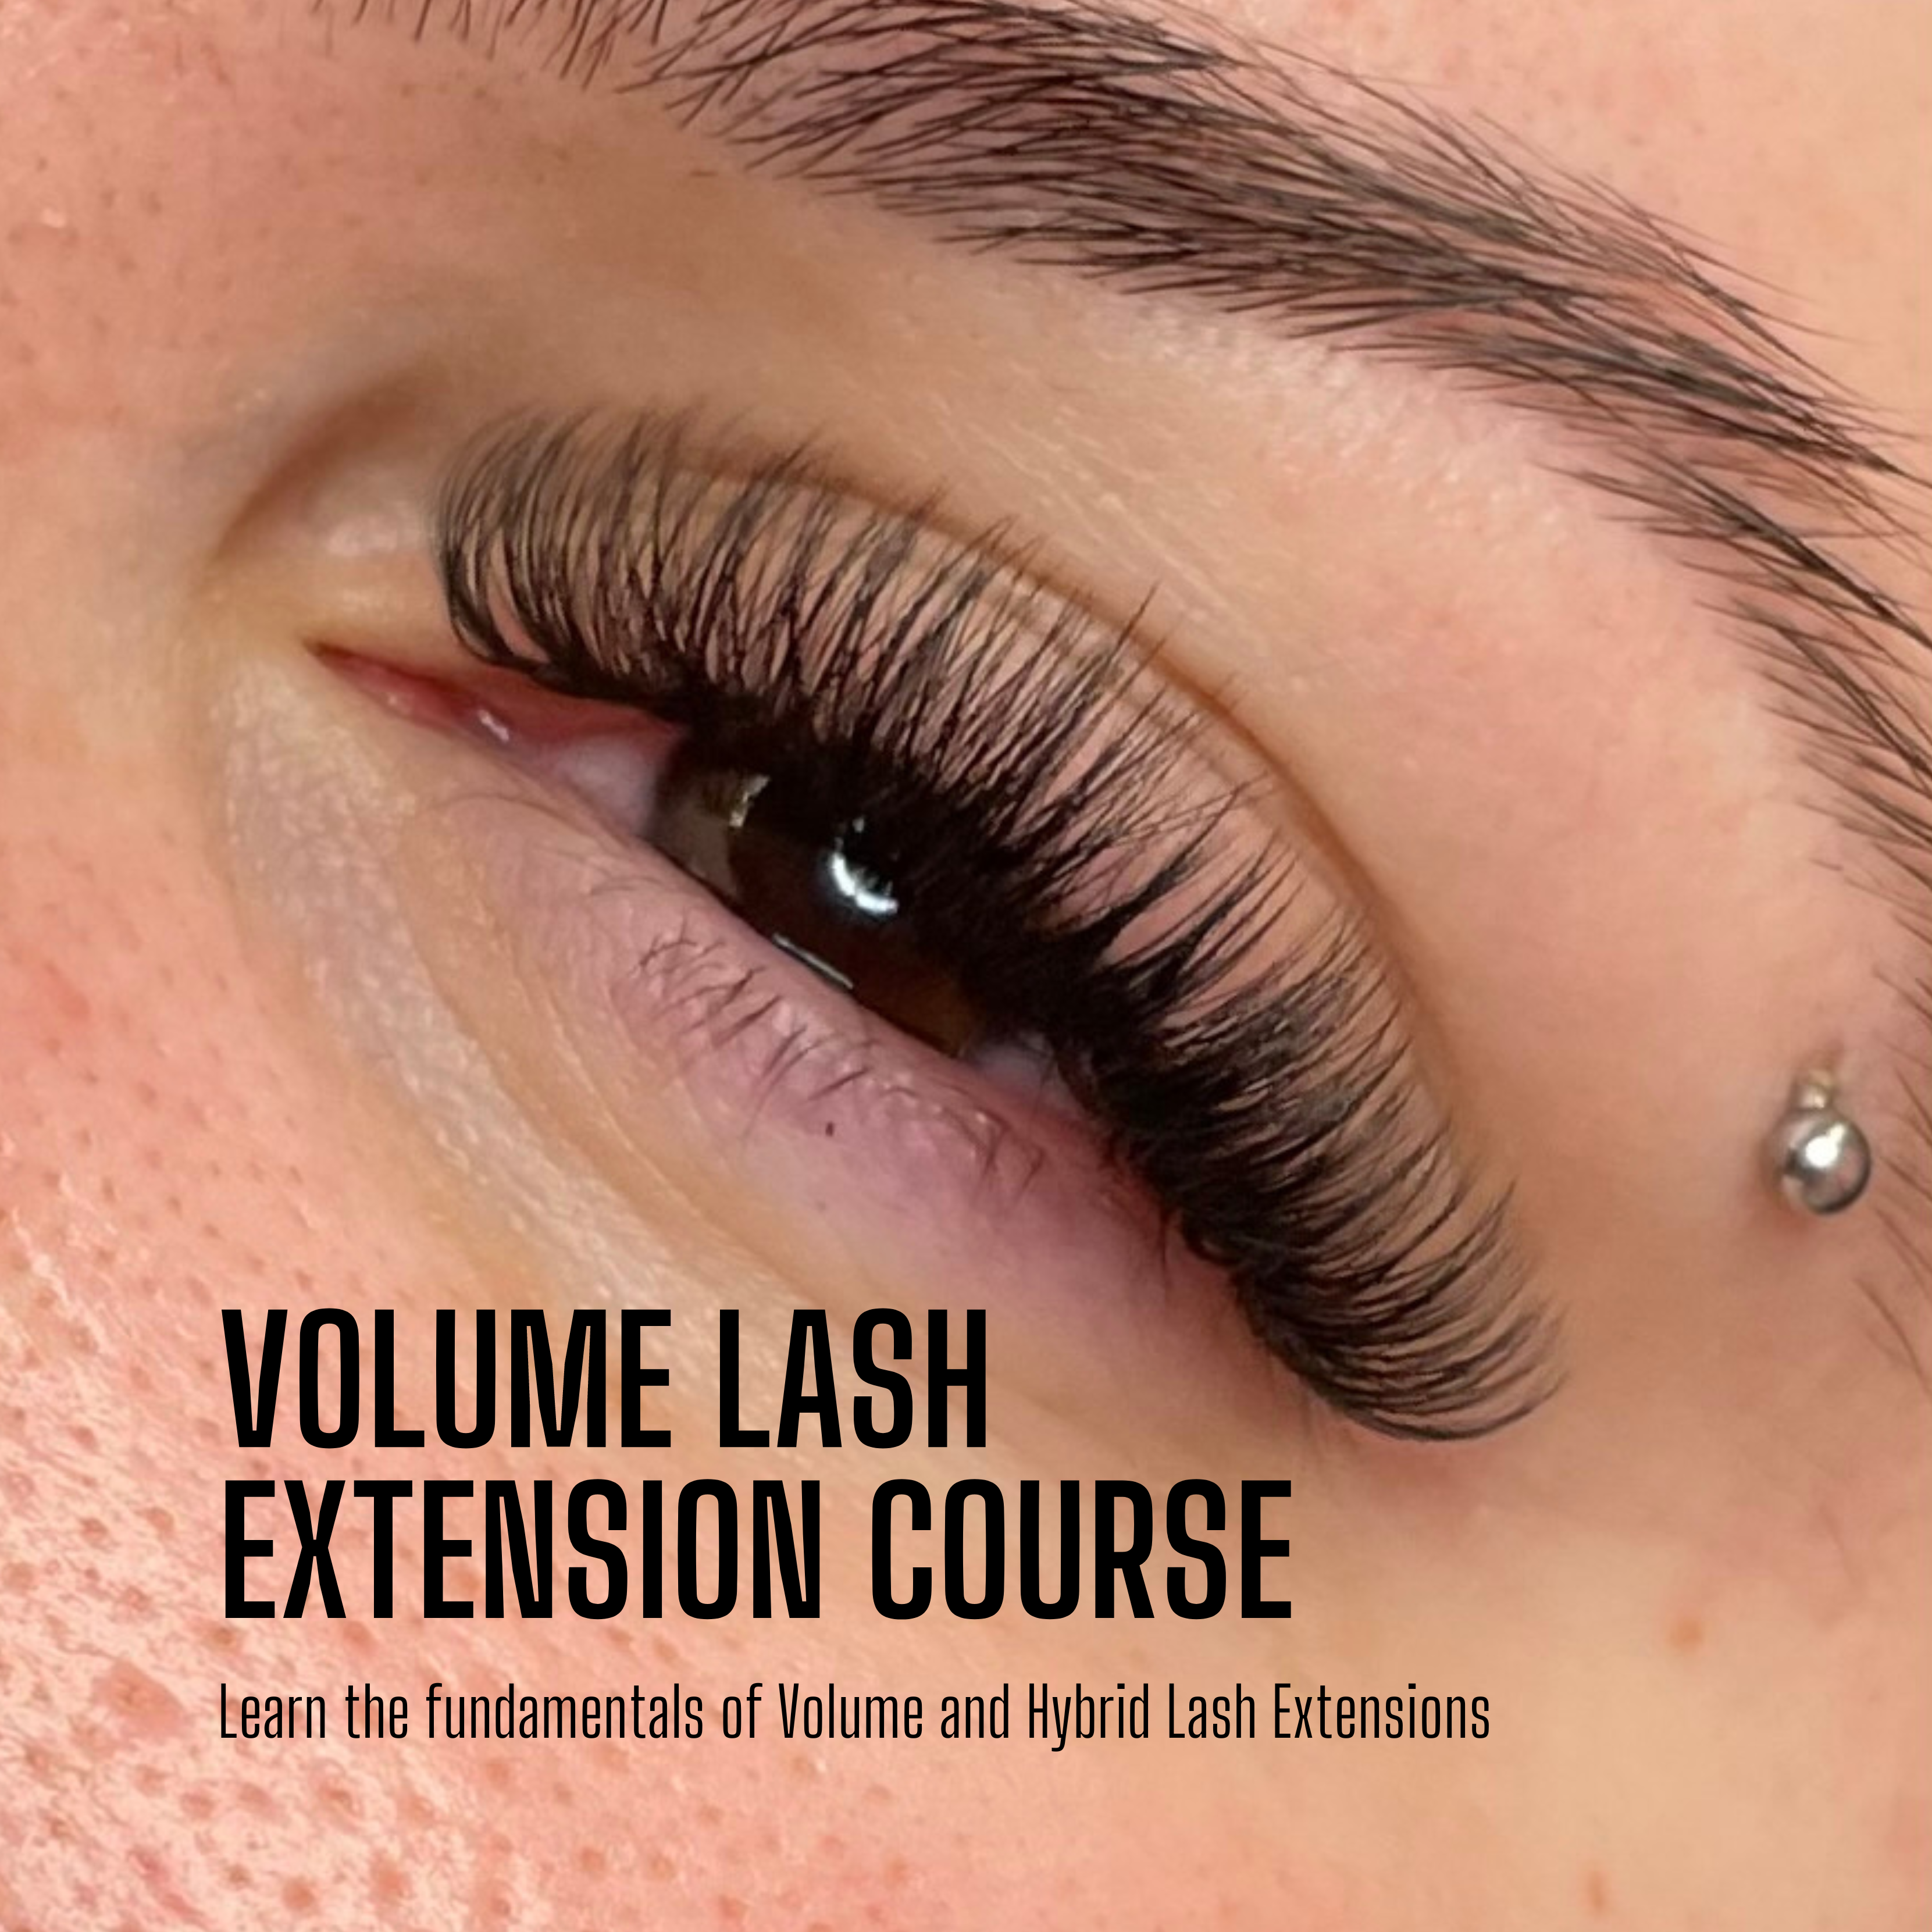 Online Volume Lash Extension Course - With Starter Kit